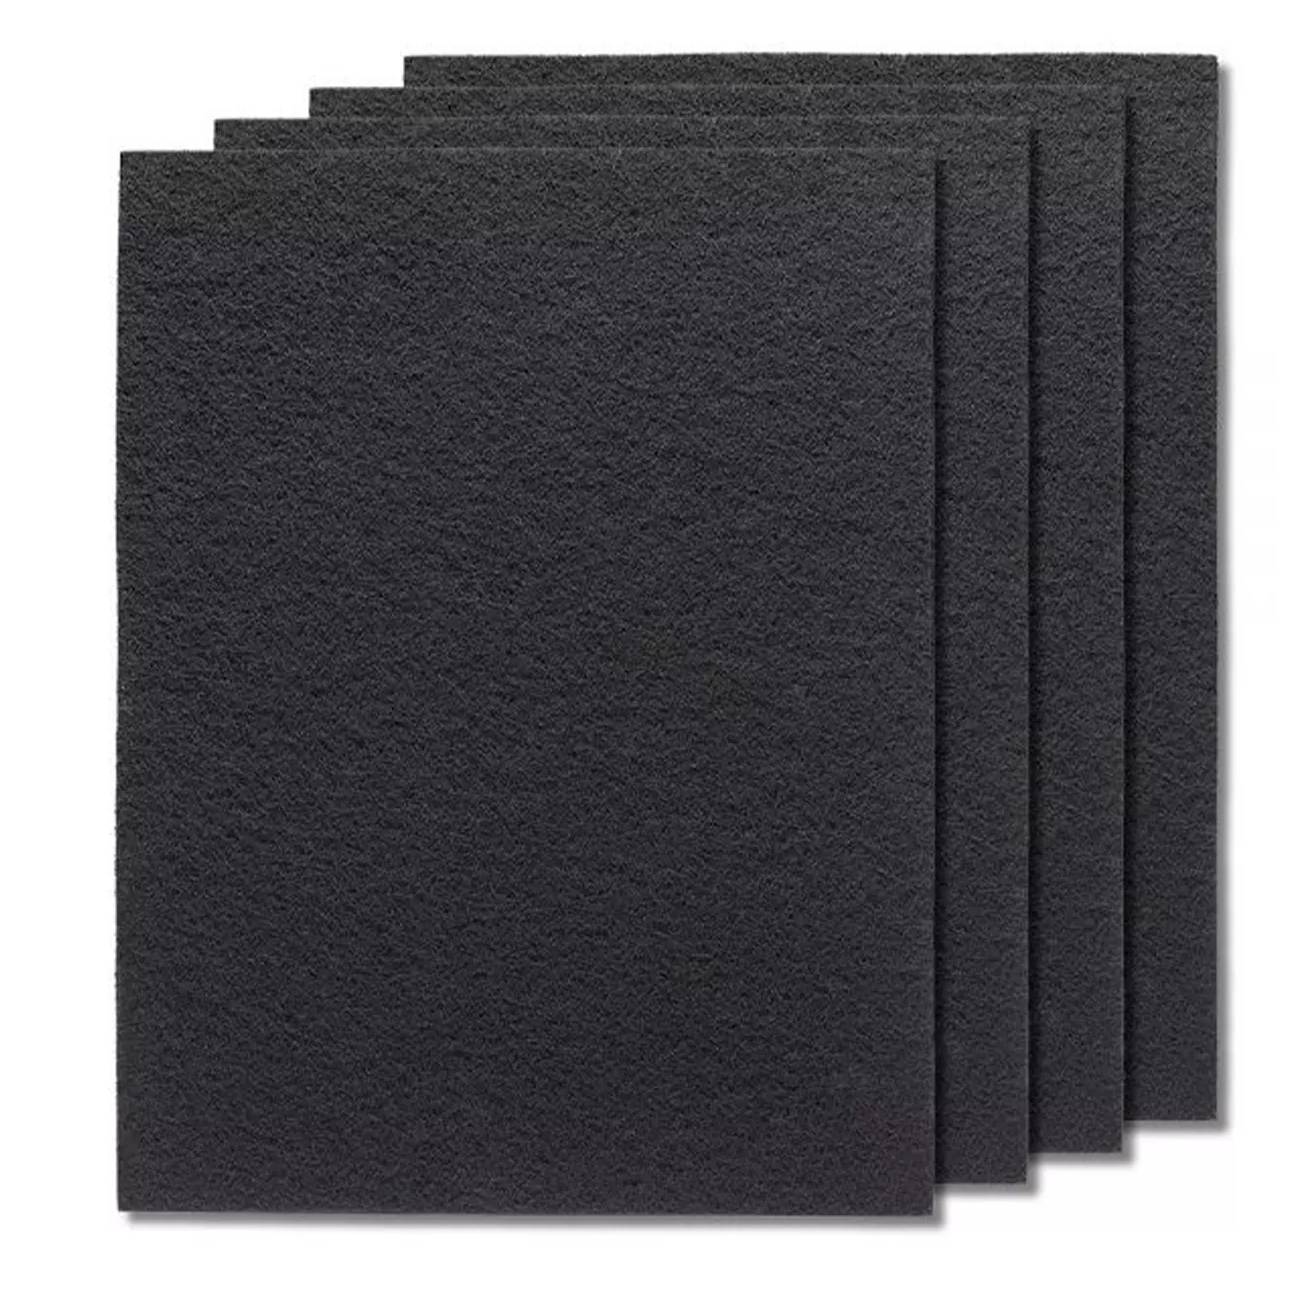 Winix 115119 Replacement Activated Carbon Filter - 4-Pack